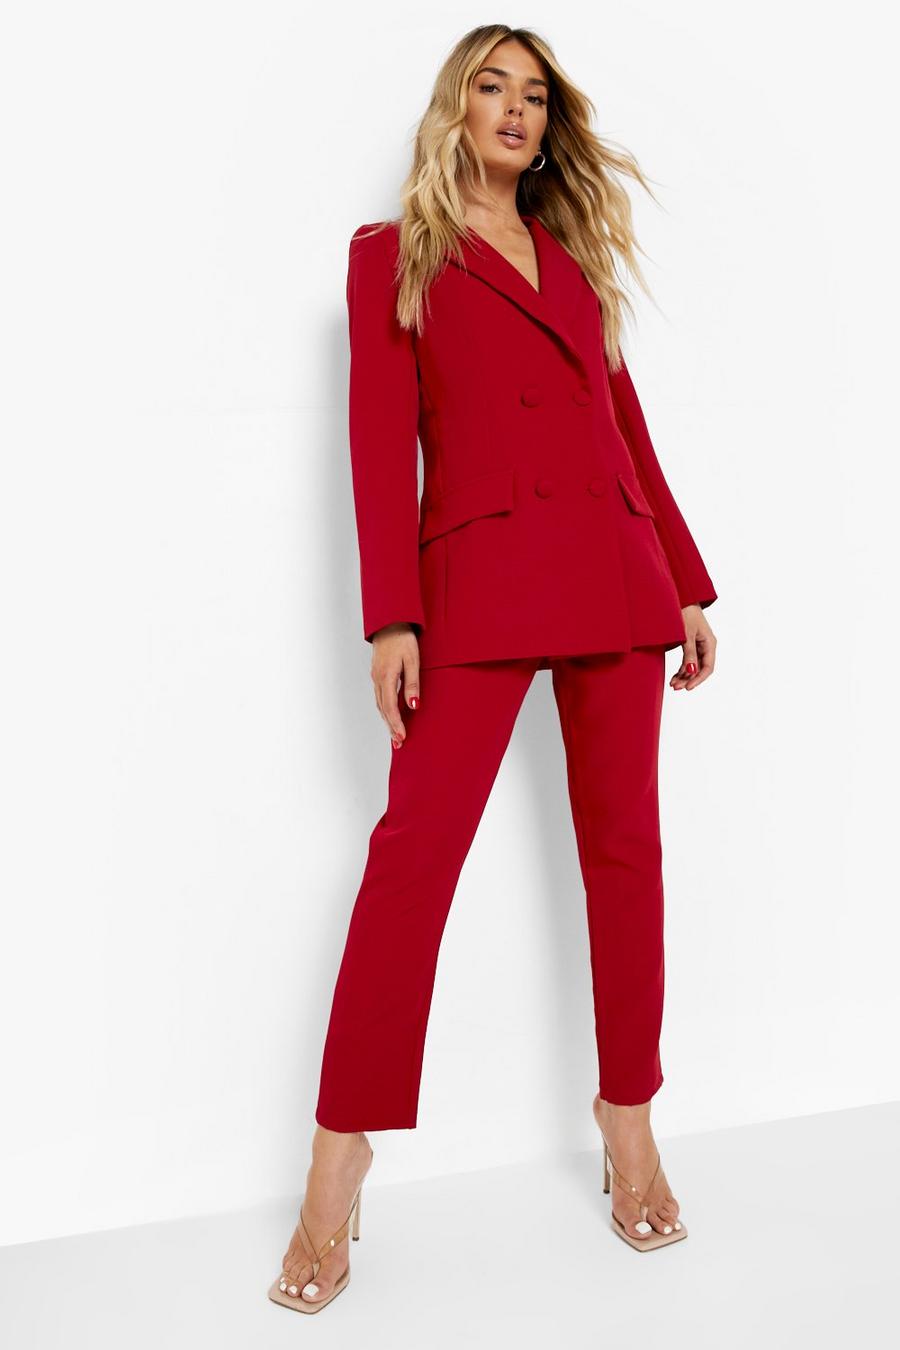 Berry Self Fabric Belted Dress Pants